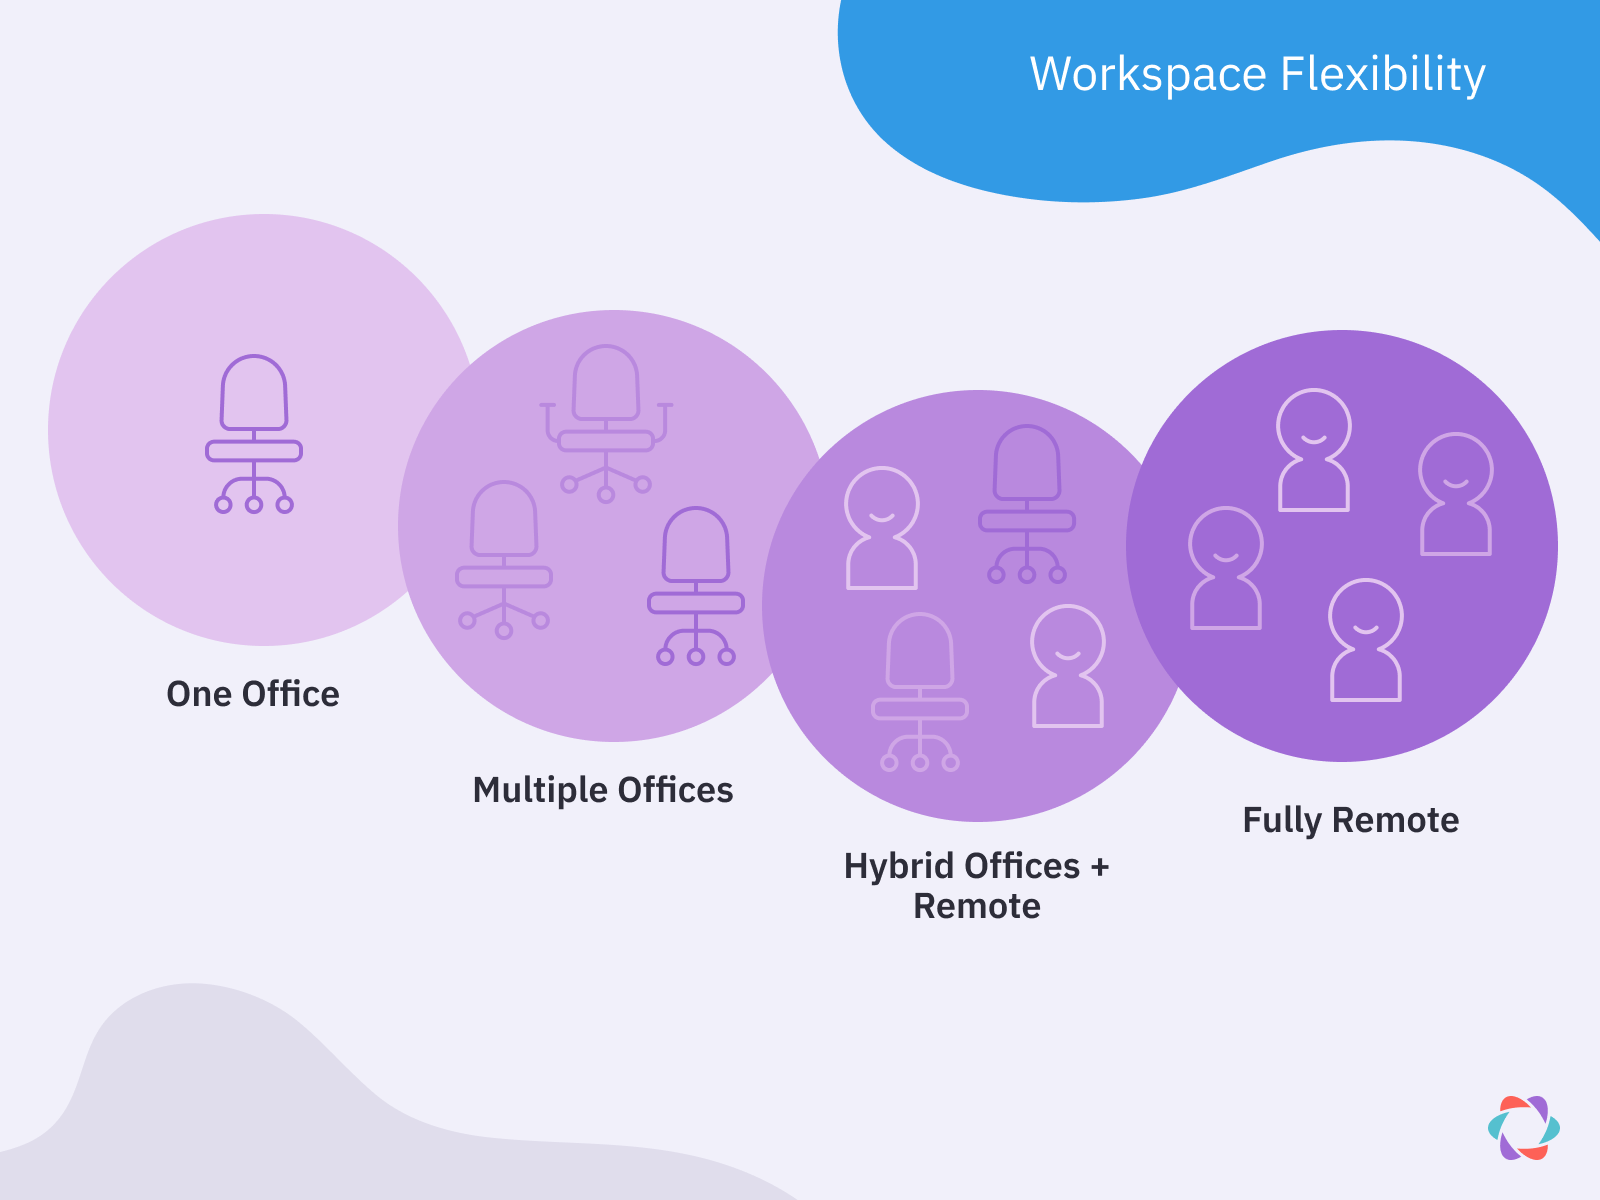 Workspace flexibility means the option to work from where you want. 